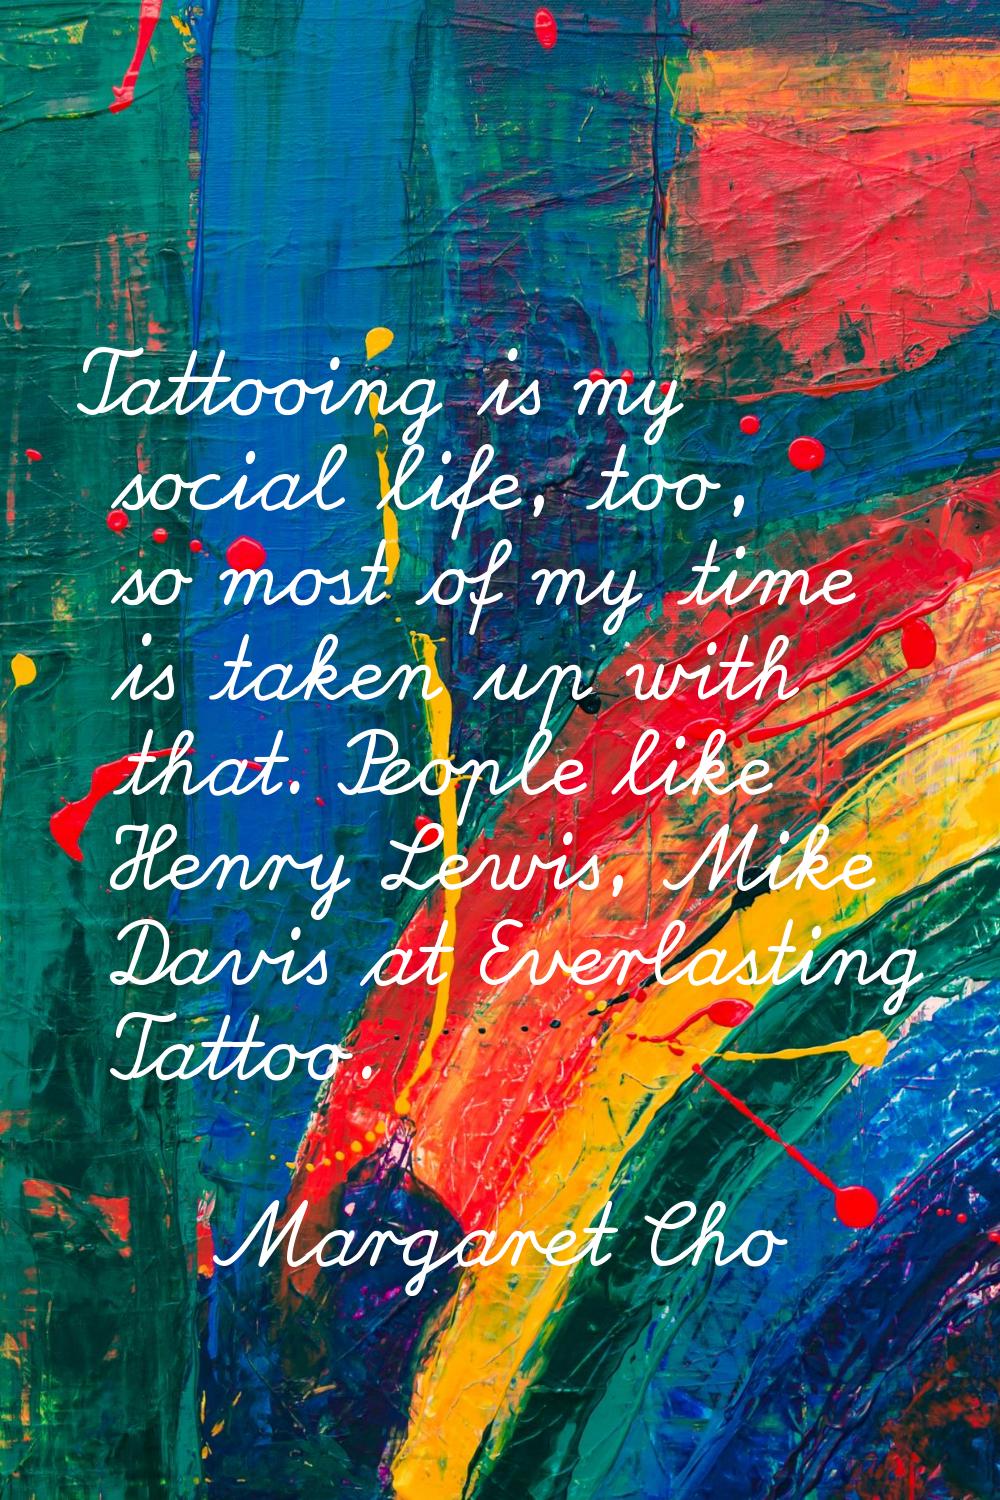 Tattooing is my social life, too, so most of my time is taken up with that. People like Henry Lewis